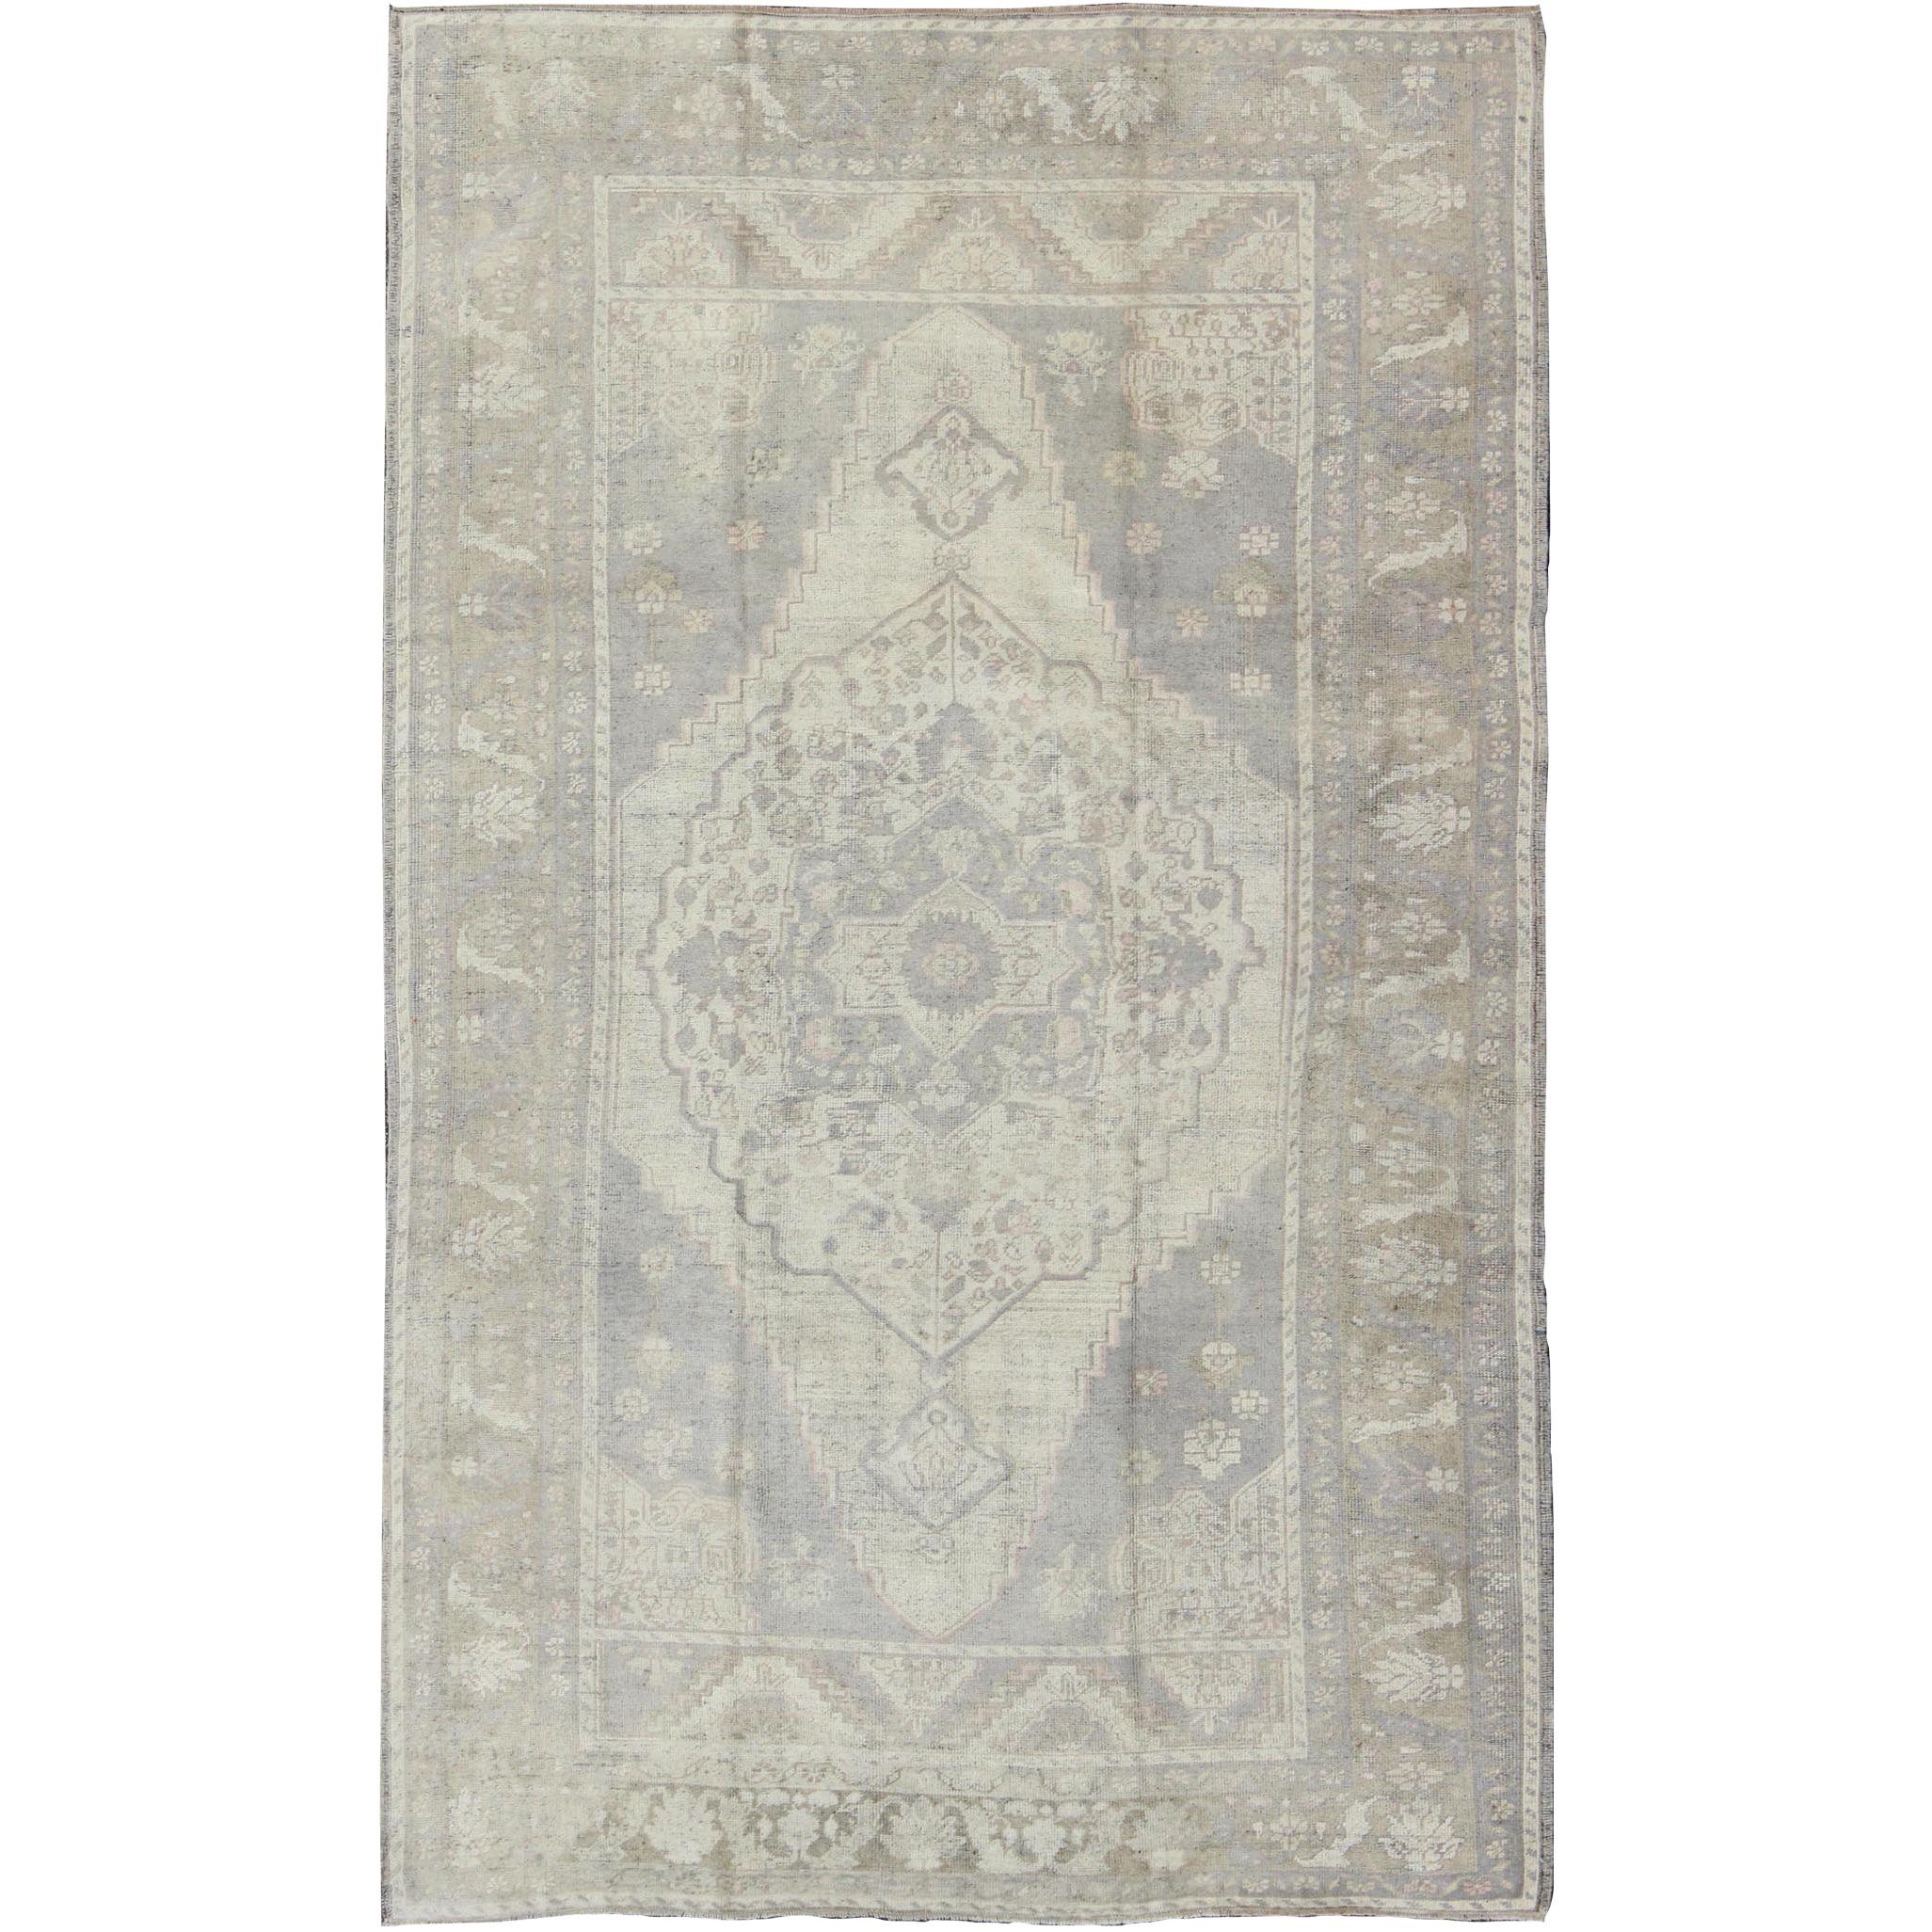 Vintage Oushak in Muted Colors of Gray, Taupe, Cream and Light Brown